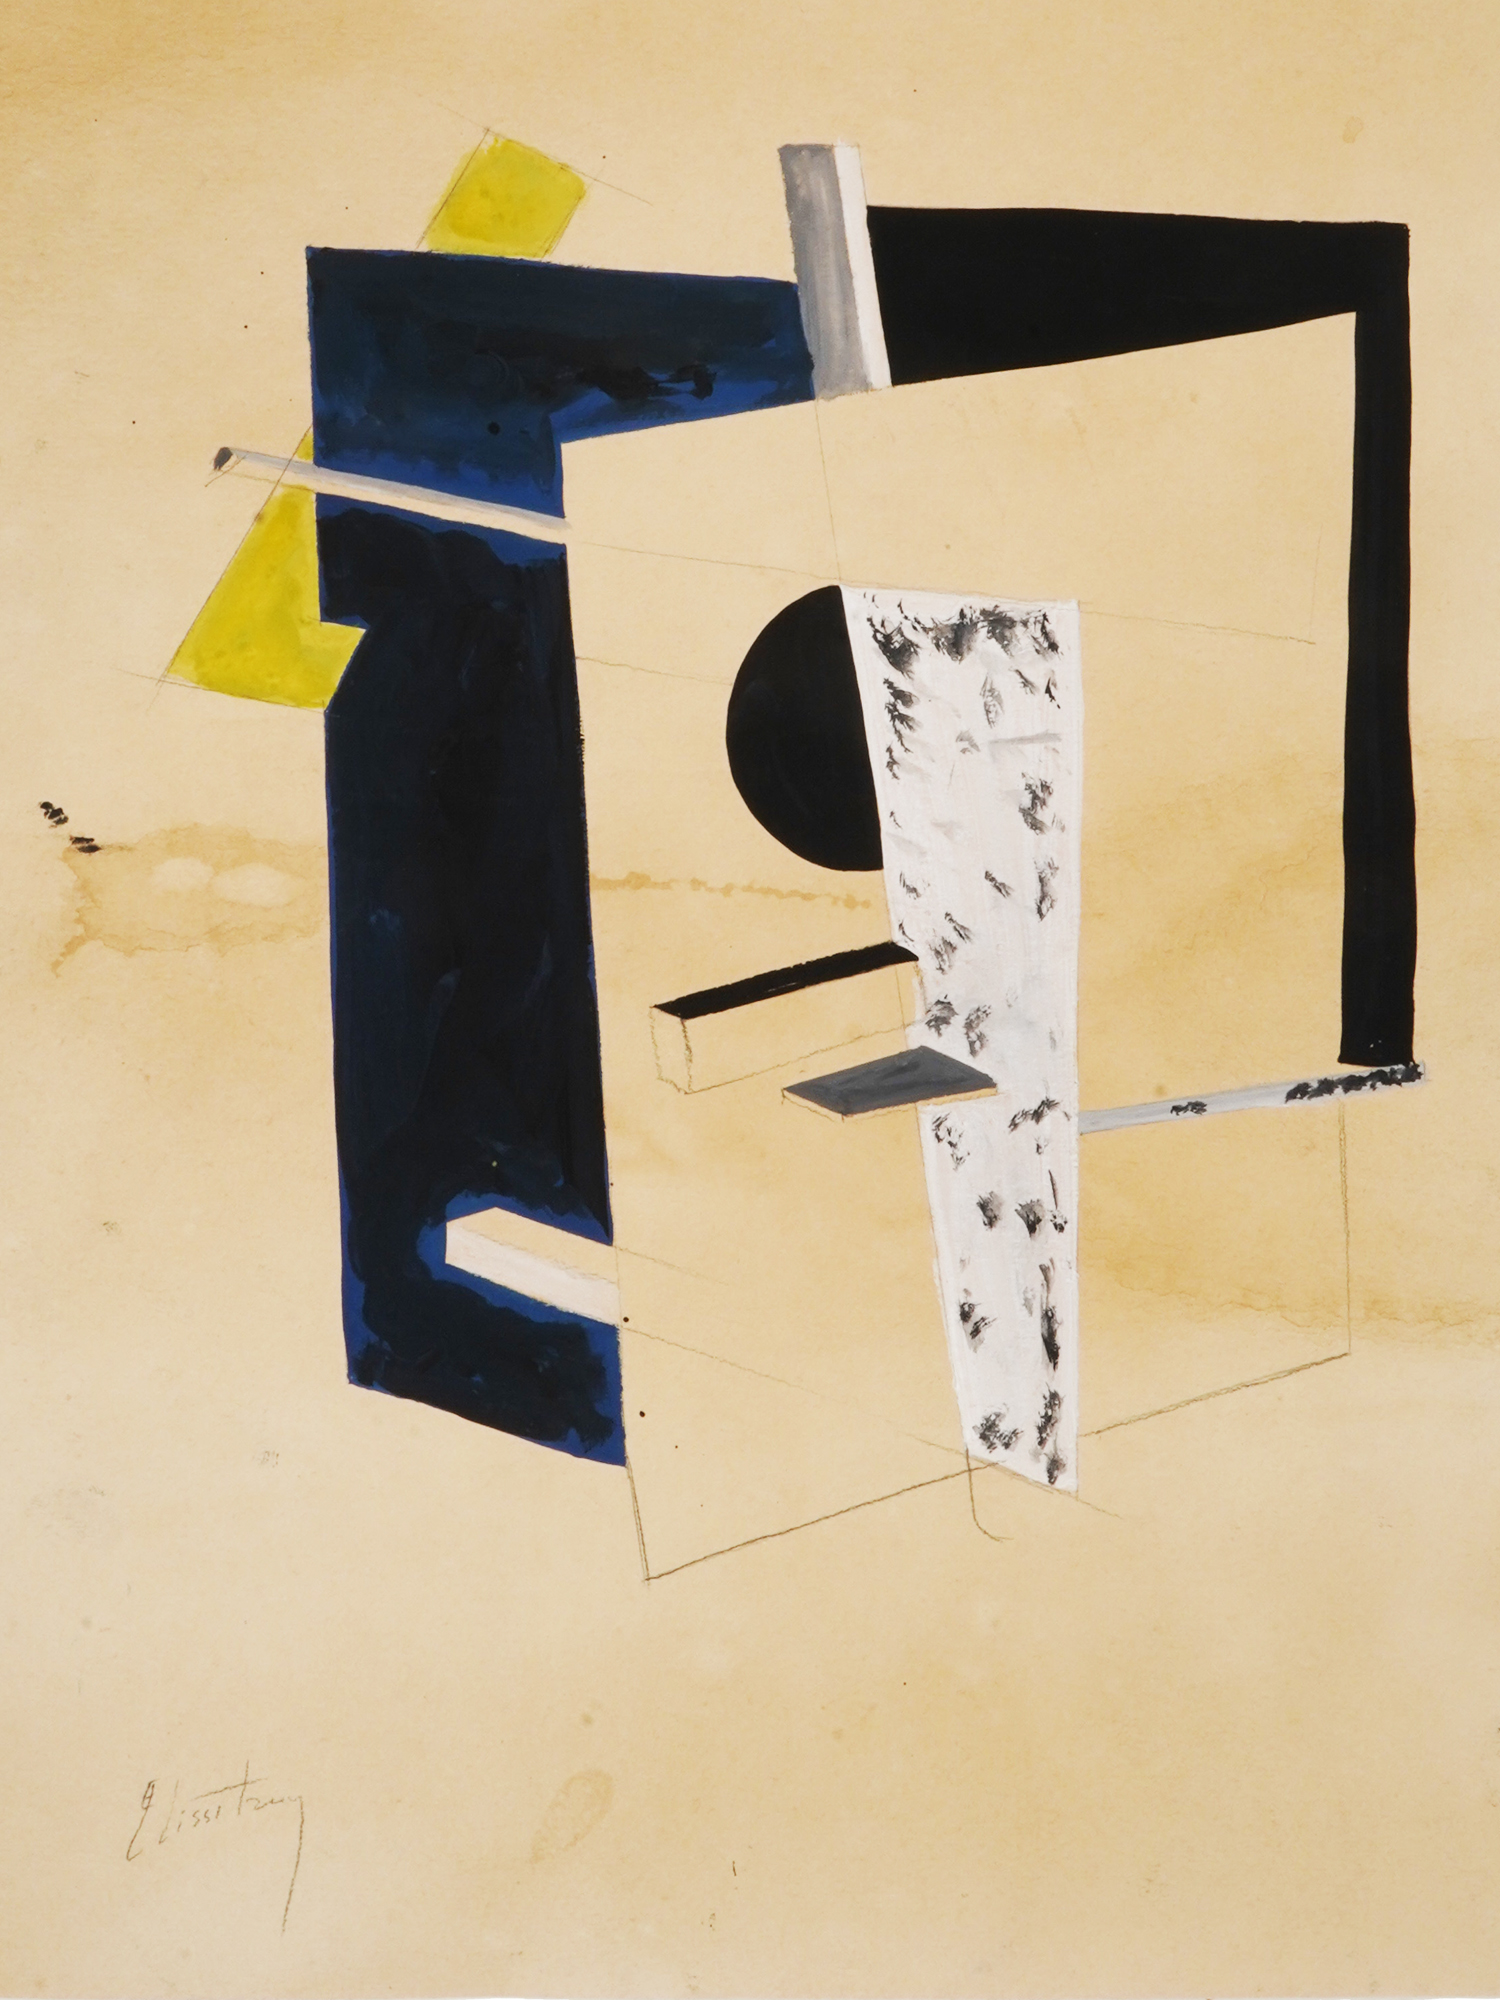 RUSSIAN CONSTRUCTIVIST PAINTING BY EL LISSITZKY PIC-1